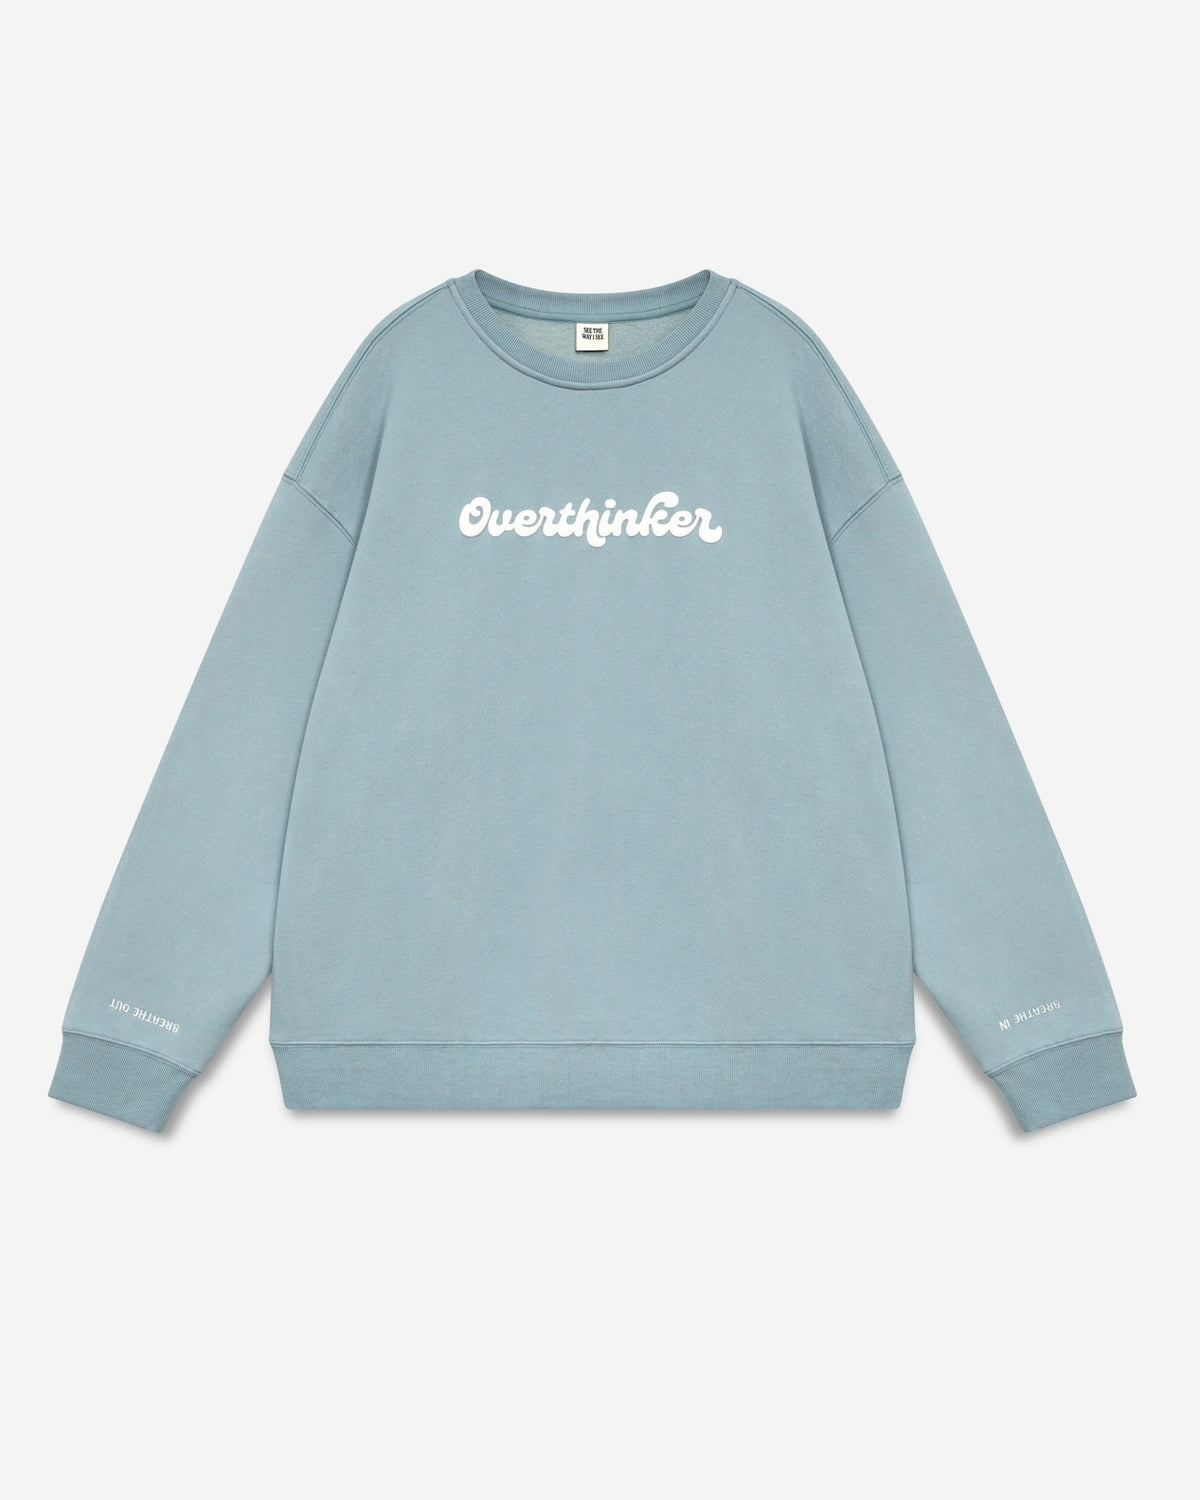 Overthinker (breathe in &amp; out) Crewneck